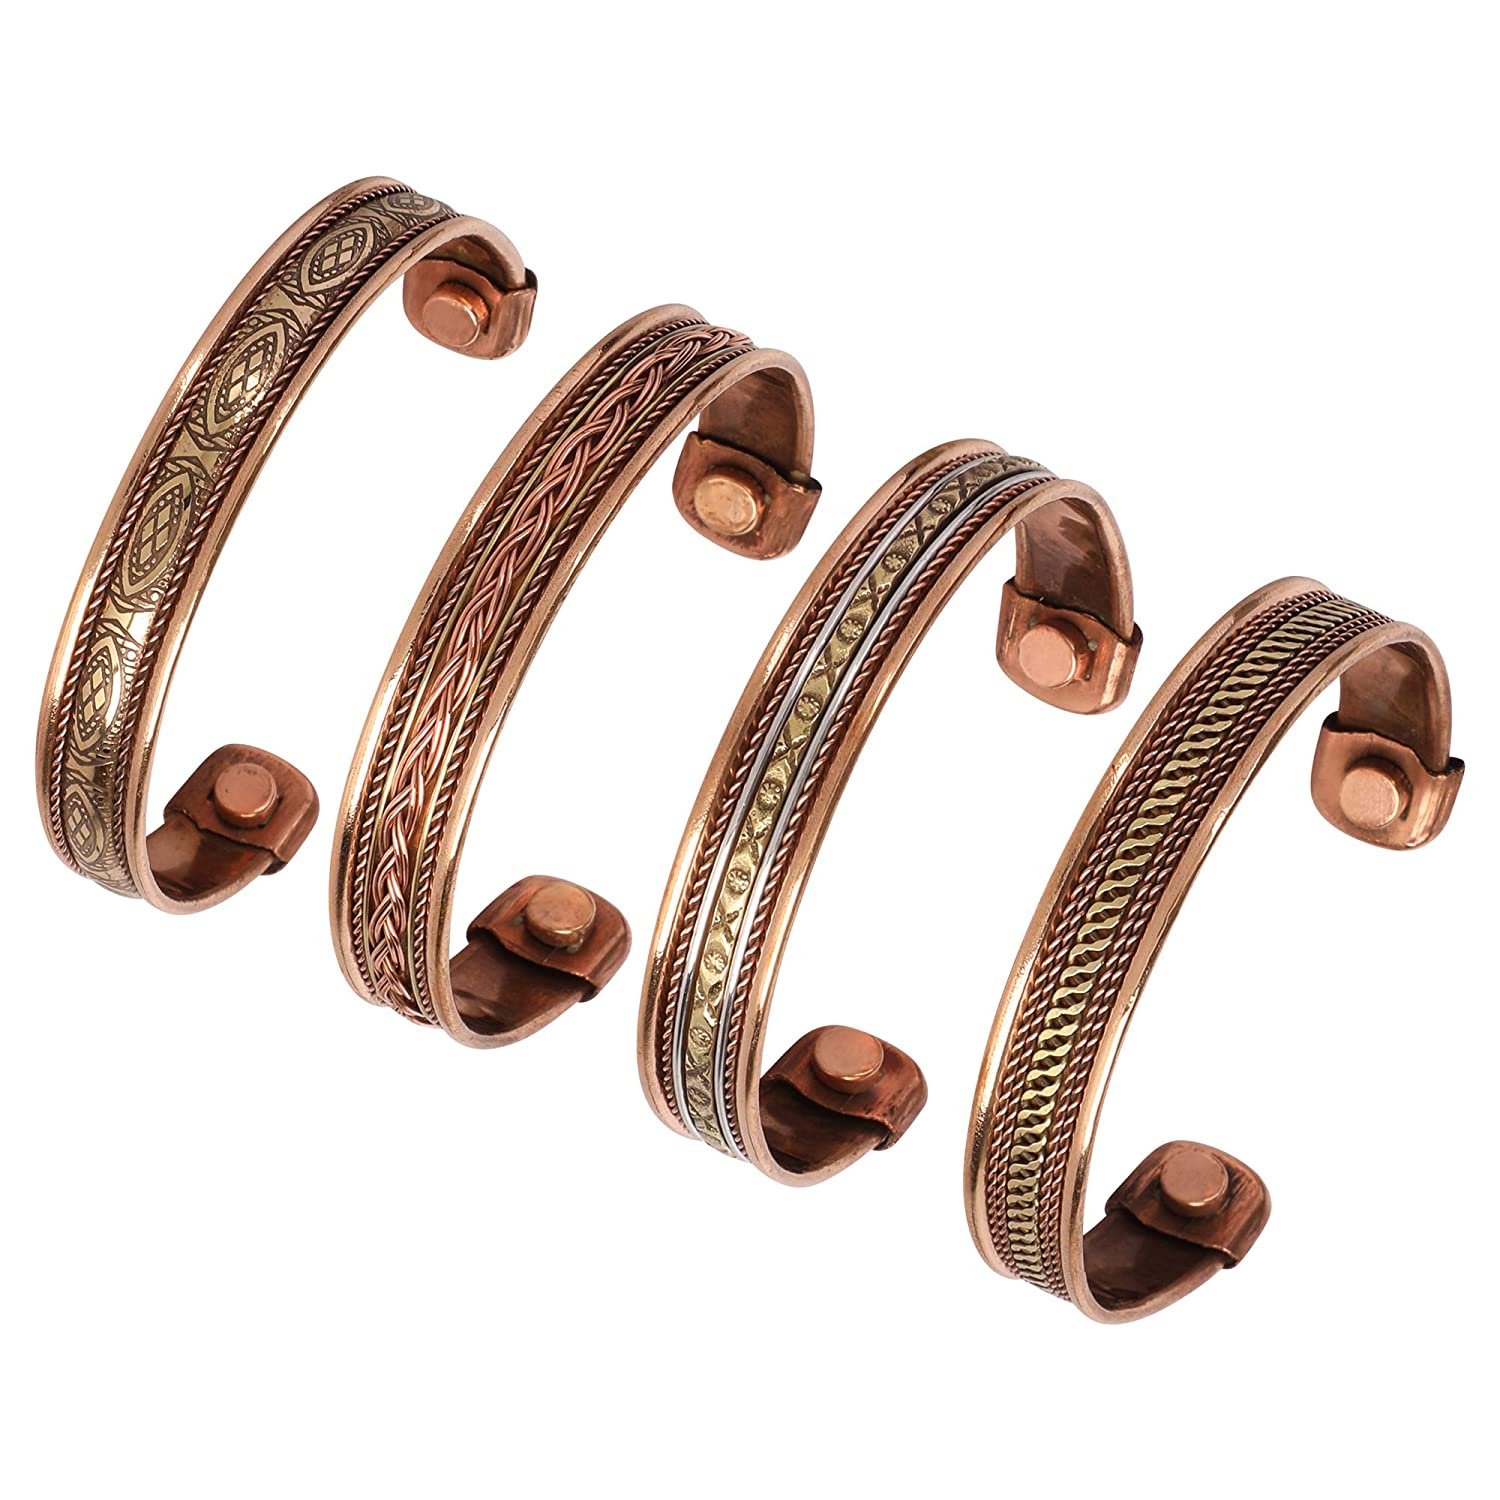 60 Copper Bangle Stock Photos Pictures  RoyaltyFree Images  iStock